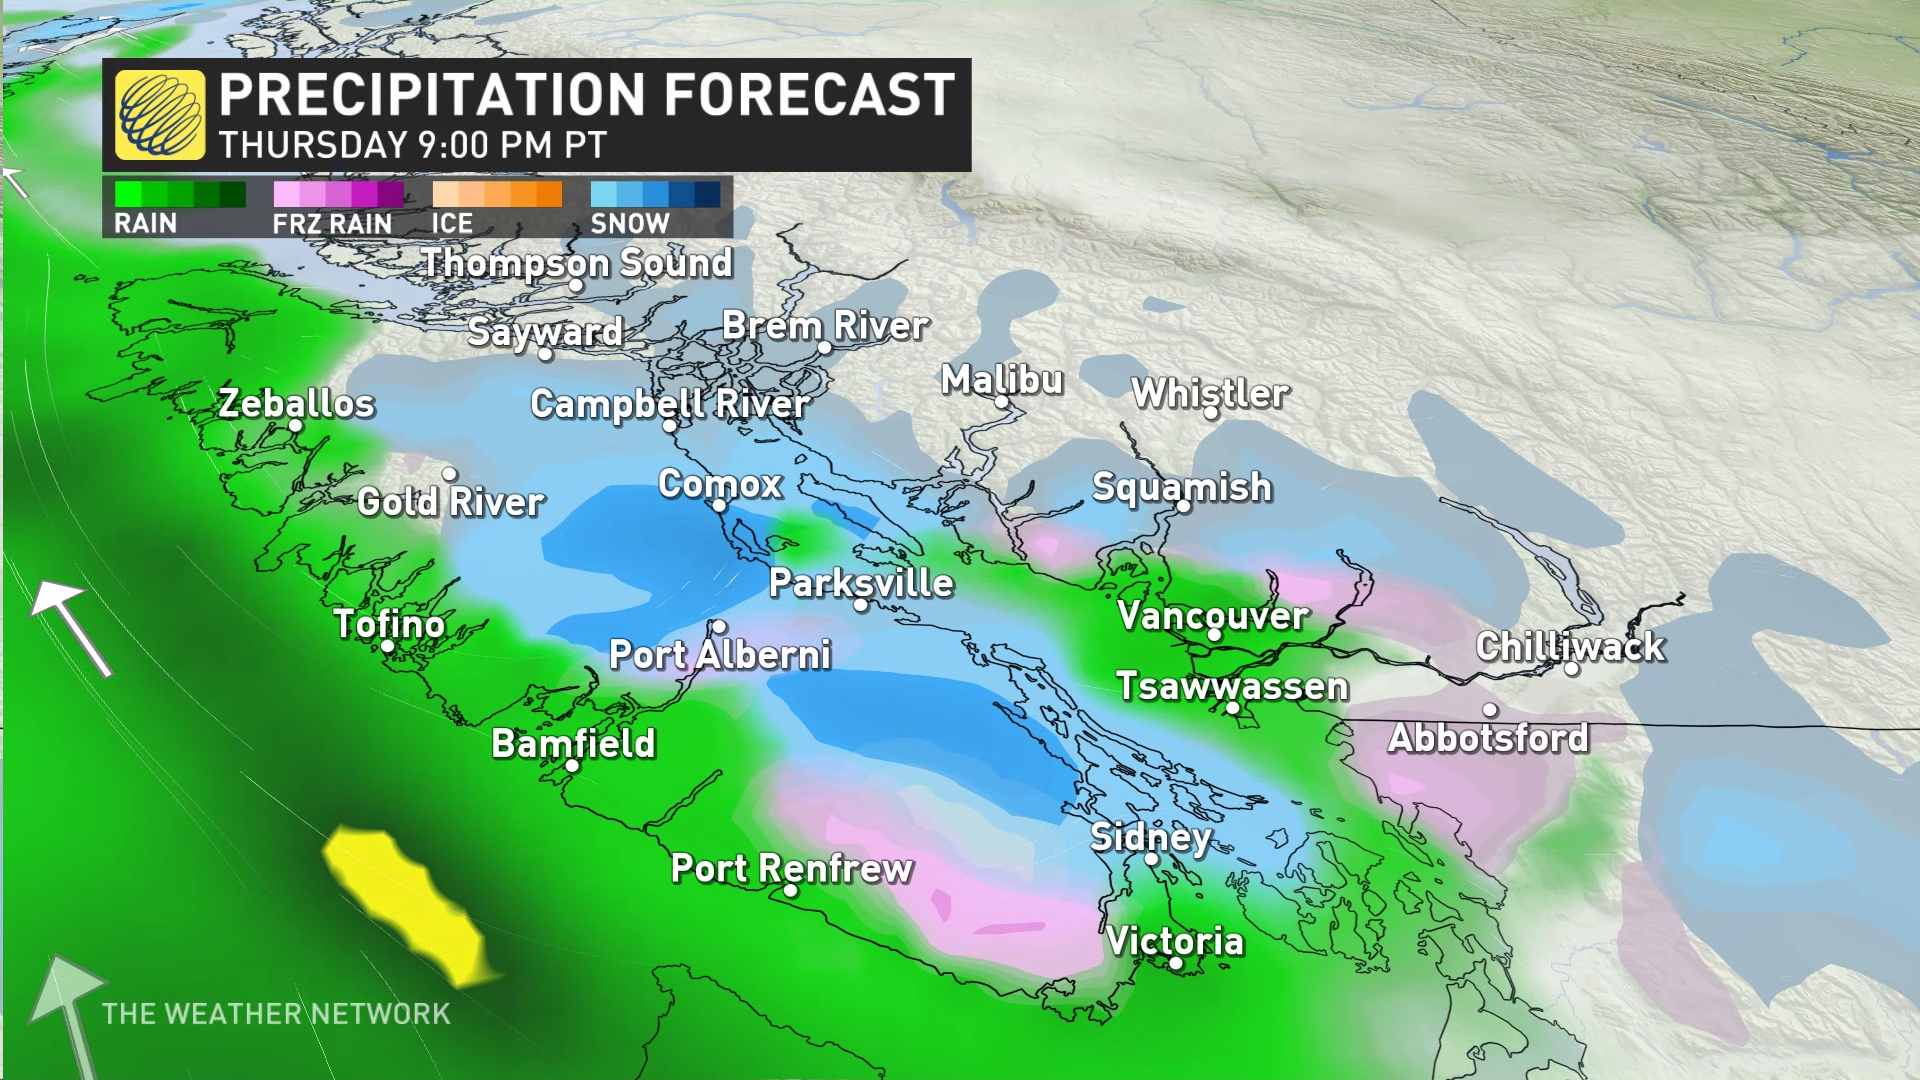 next winter storm takes aim at b.c. with a snow, freezing rain risk into friday